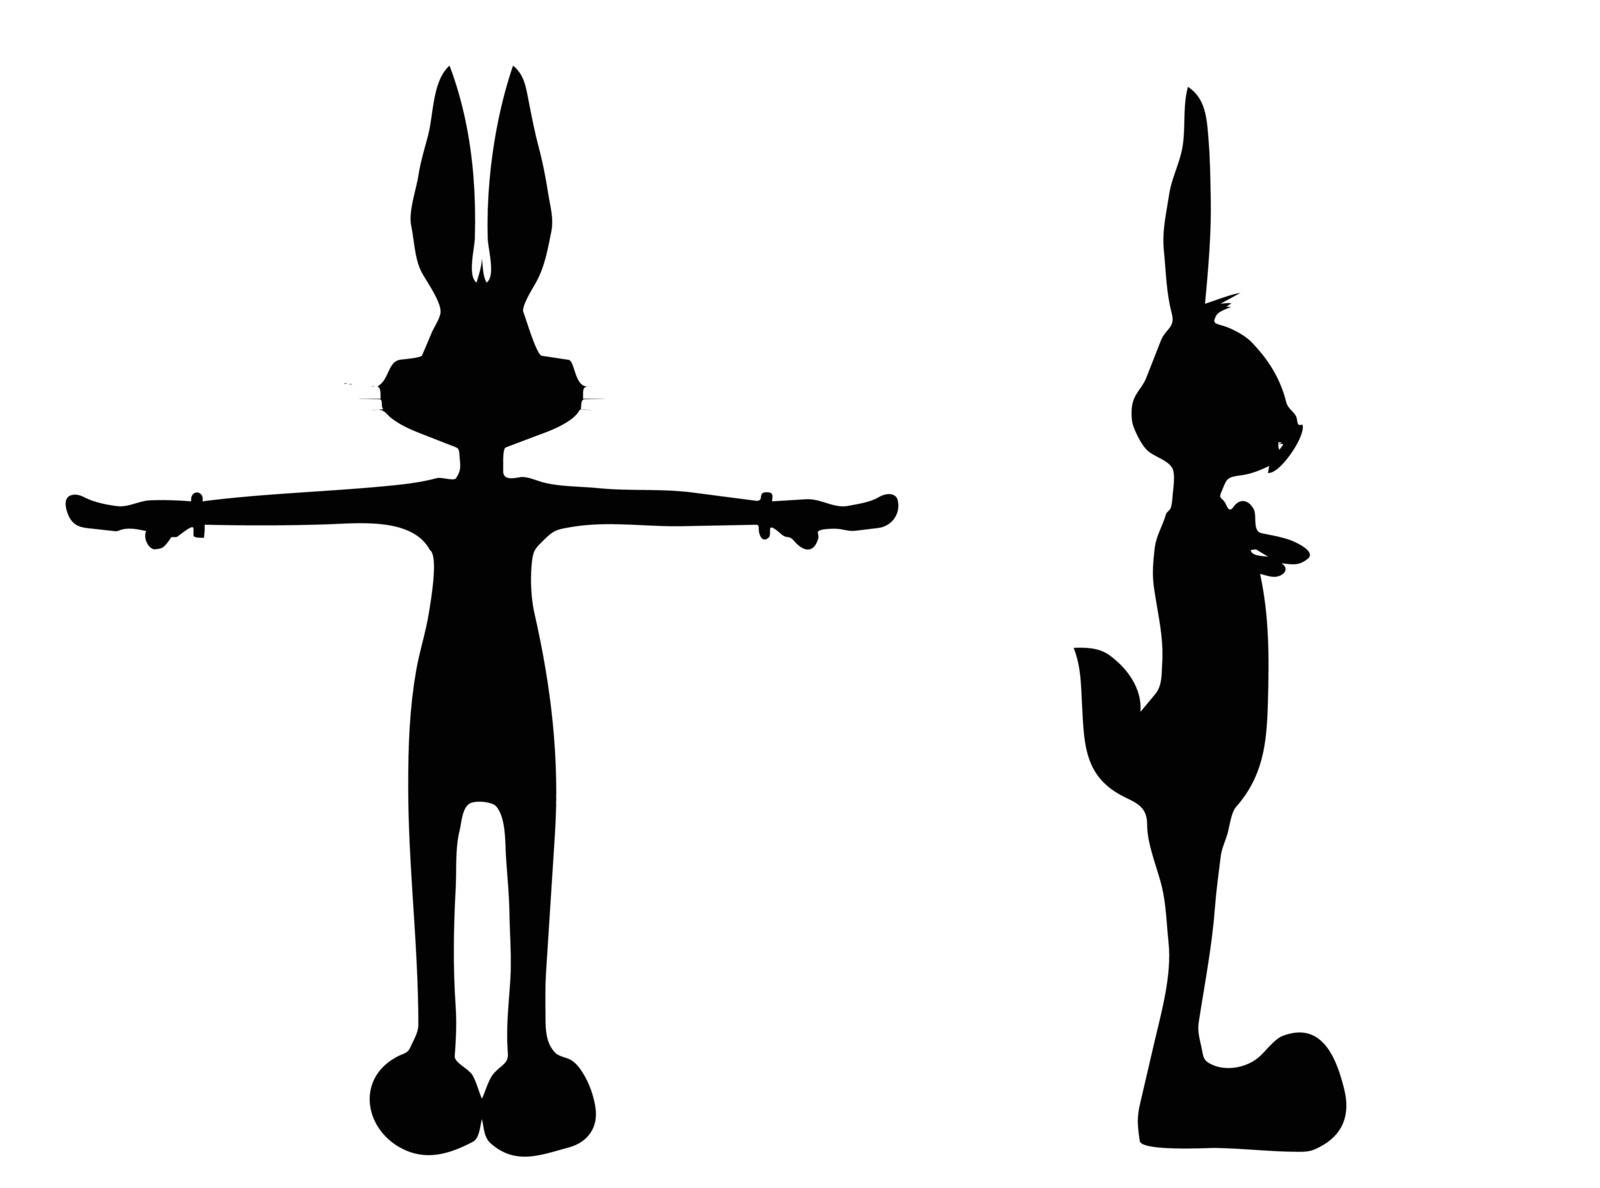 Cartoon bunny silhouette by Istanbul2009